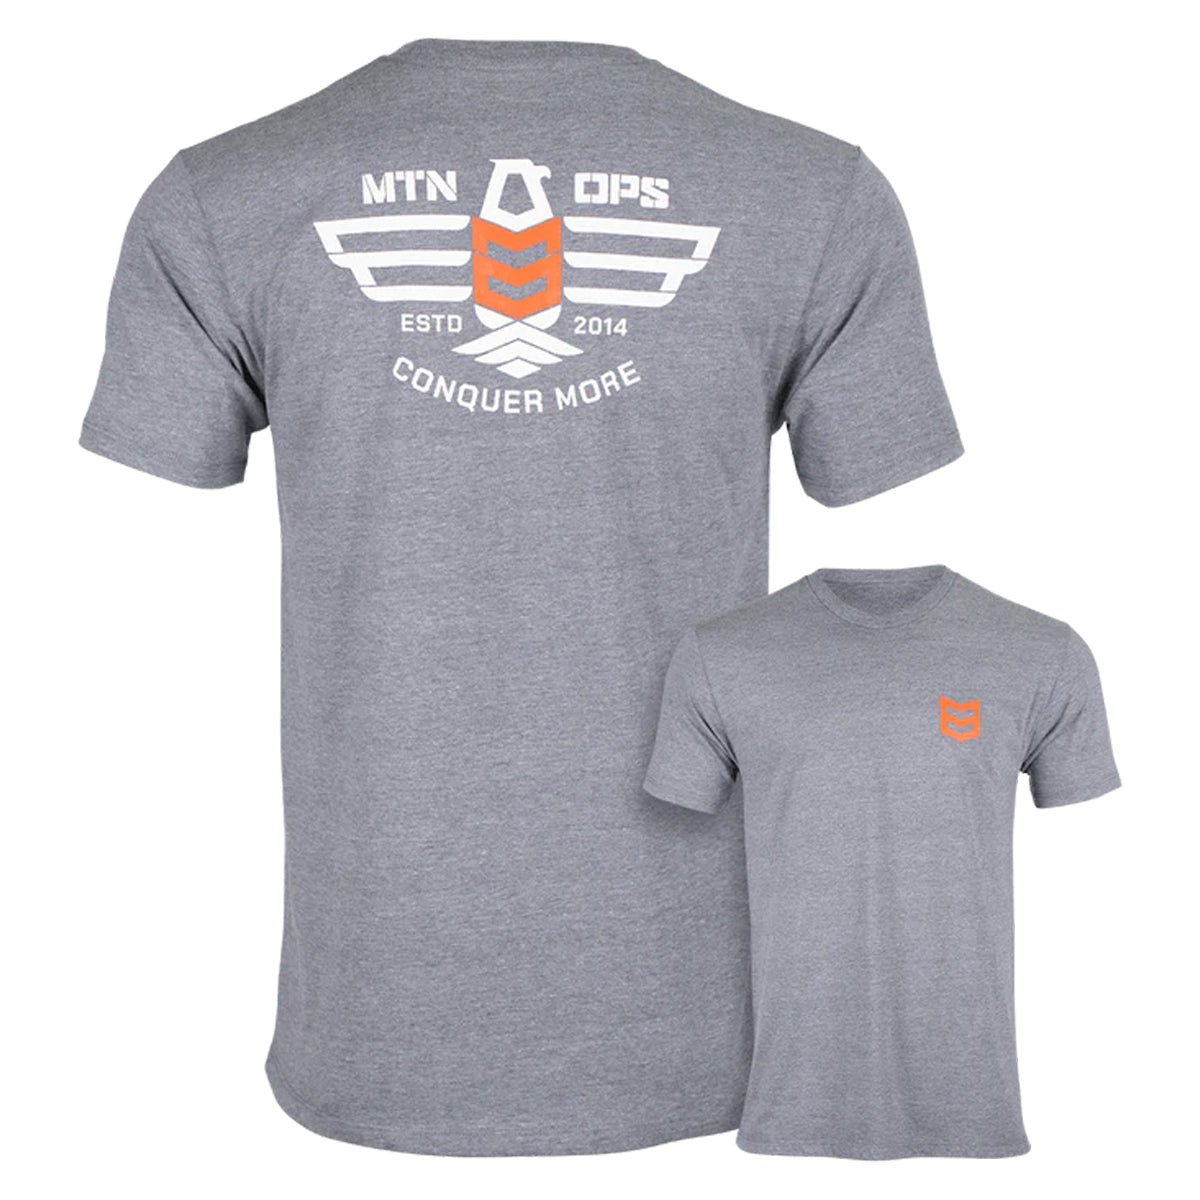 MTN OPS Ace Shirt in  by GOHUNT | Mtn Ops - GOHUNT Shop